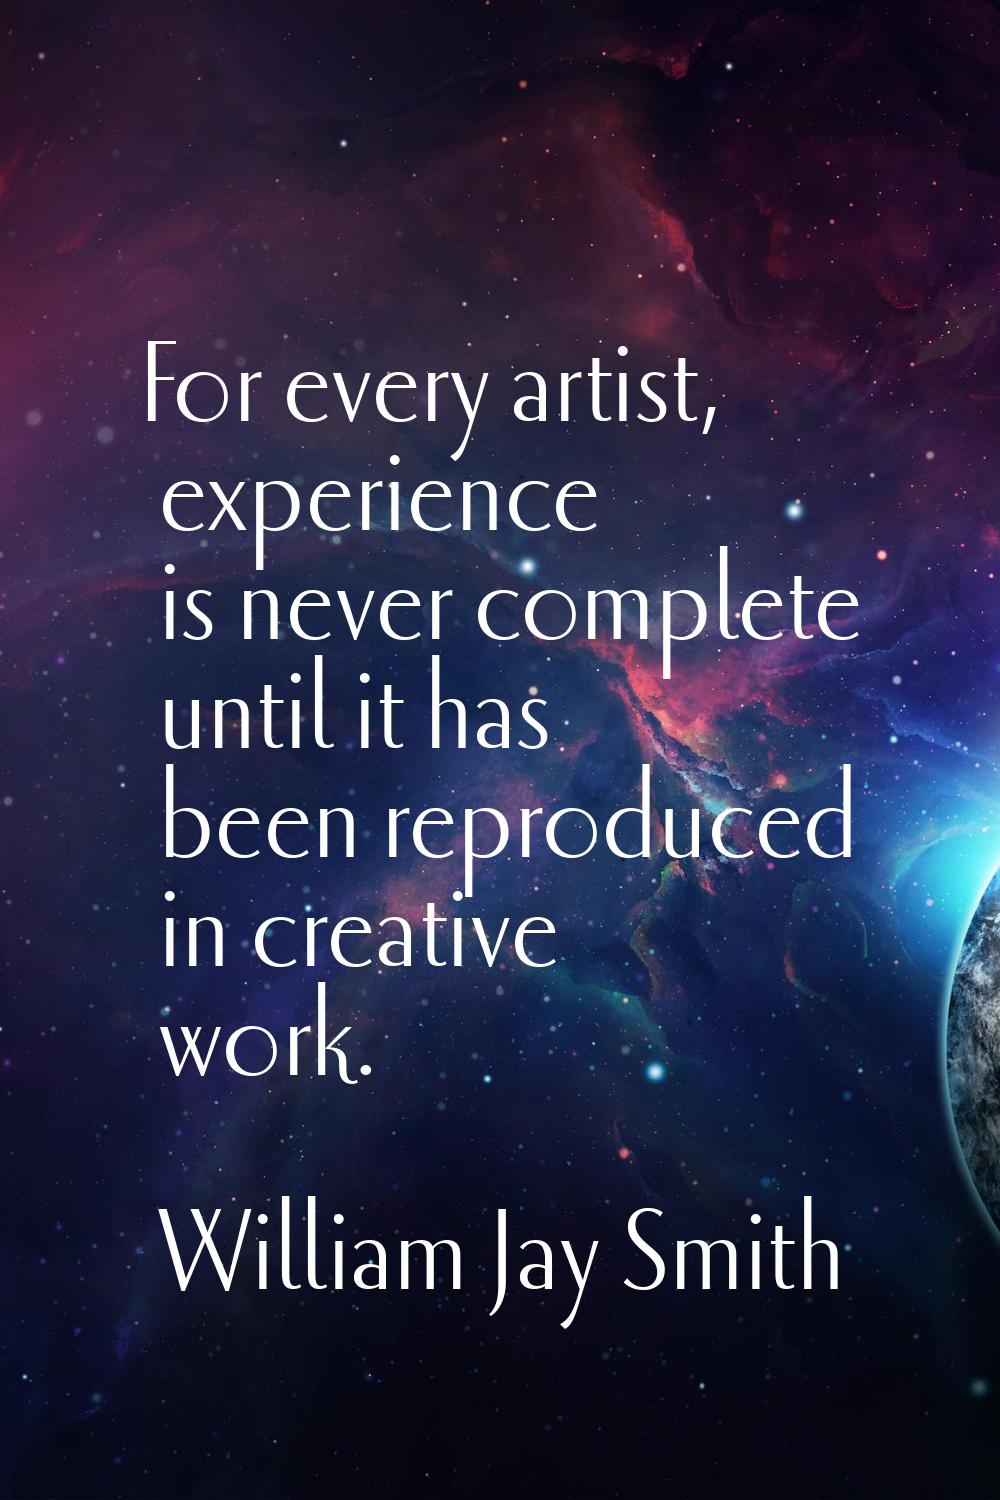 For every artist, experience is never complete until it has been reproduced in creative work.